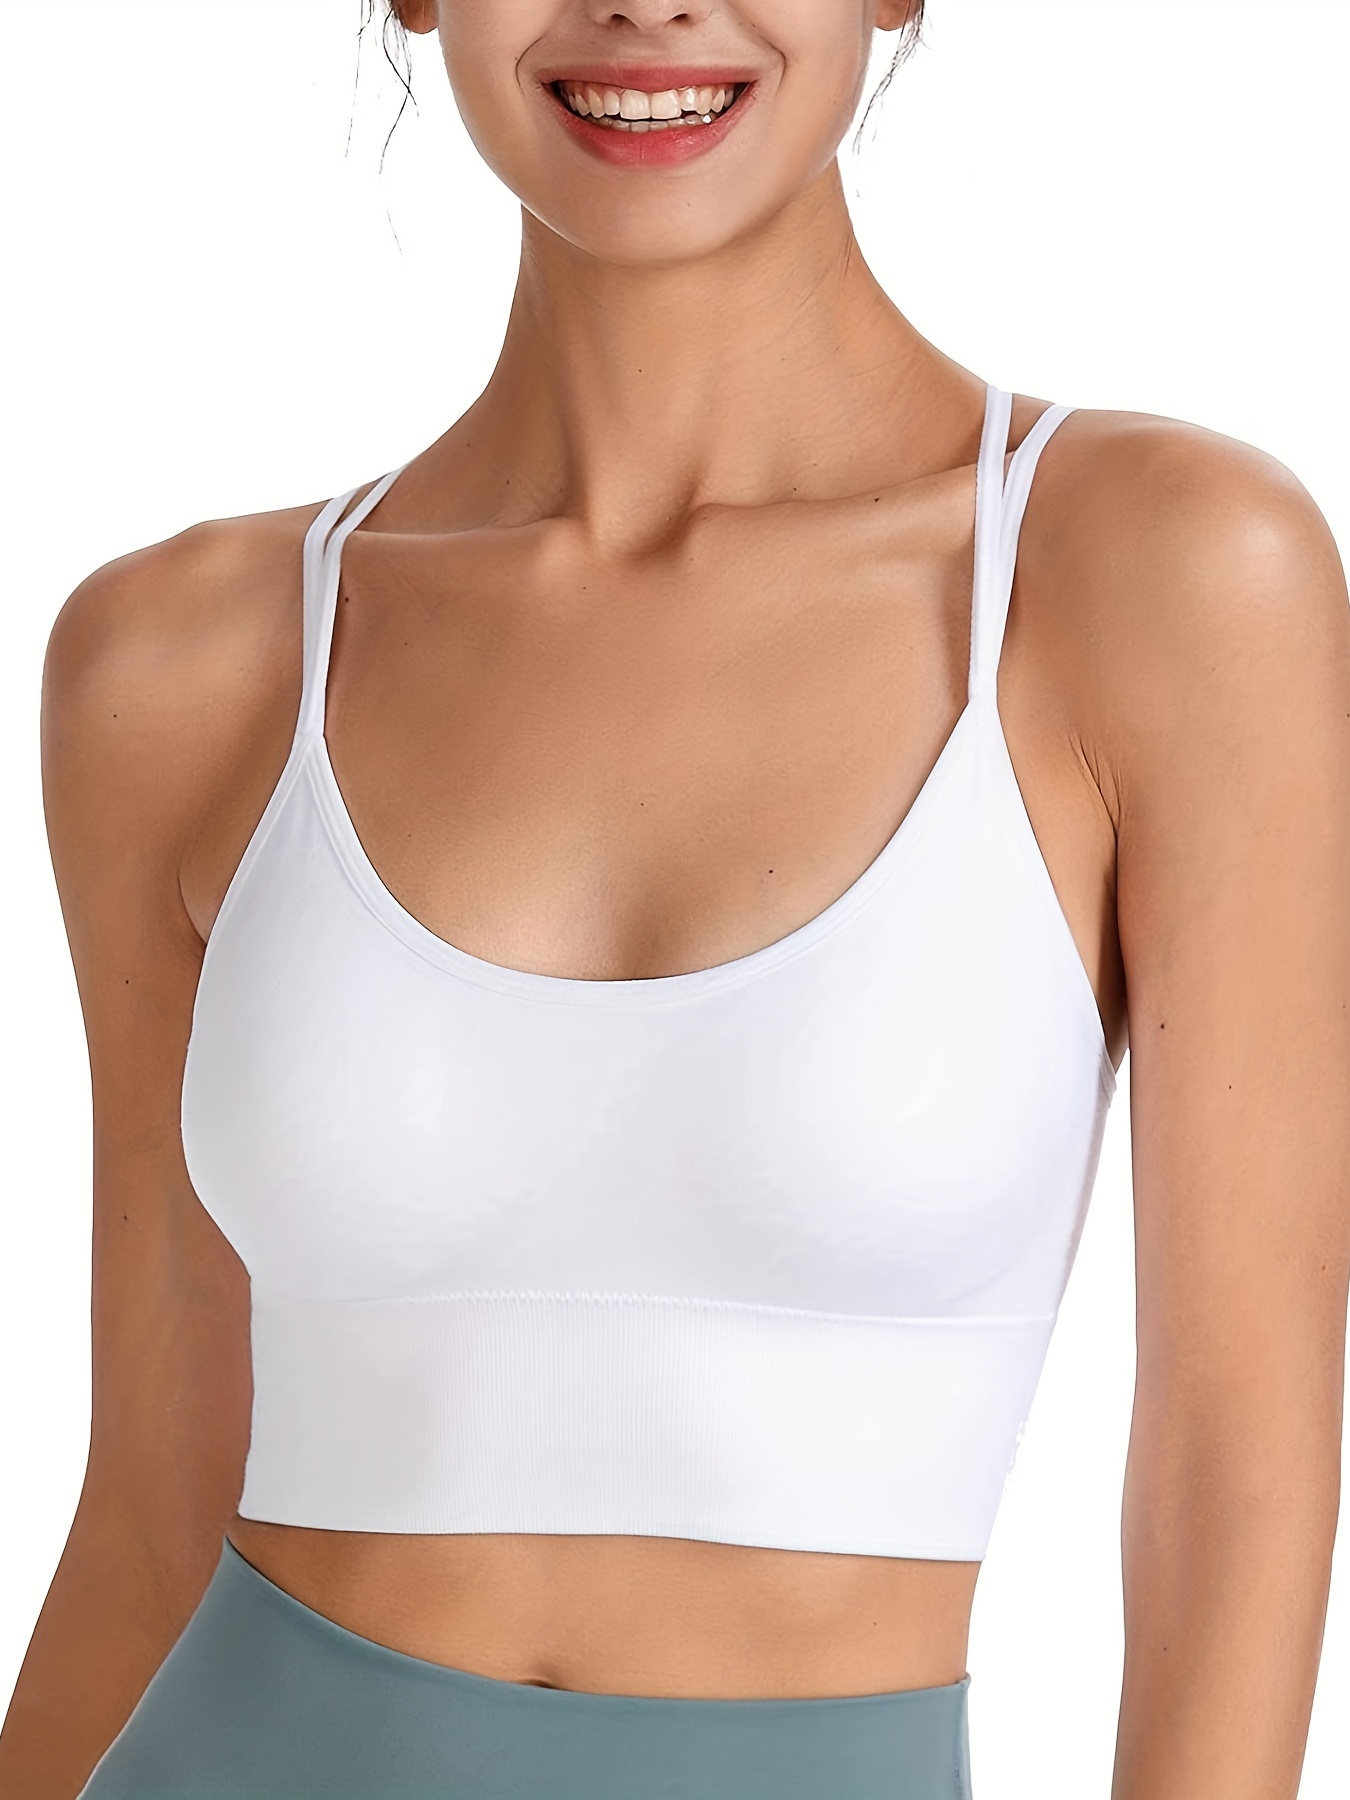 Crop Tops for Women Cropped Tank Sleeveless Top Workout Padded Sports Bra